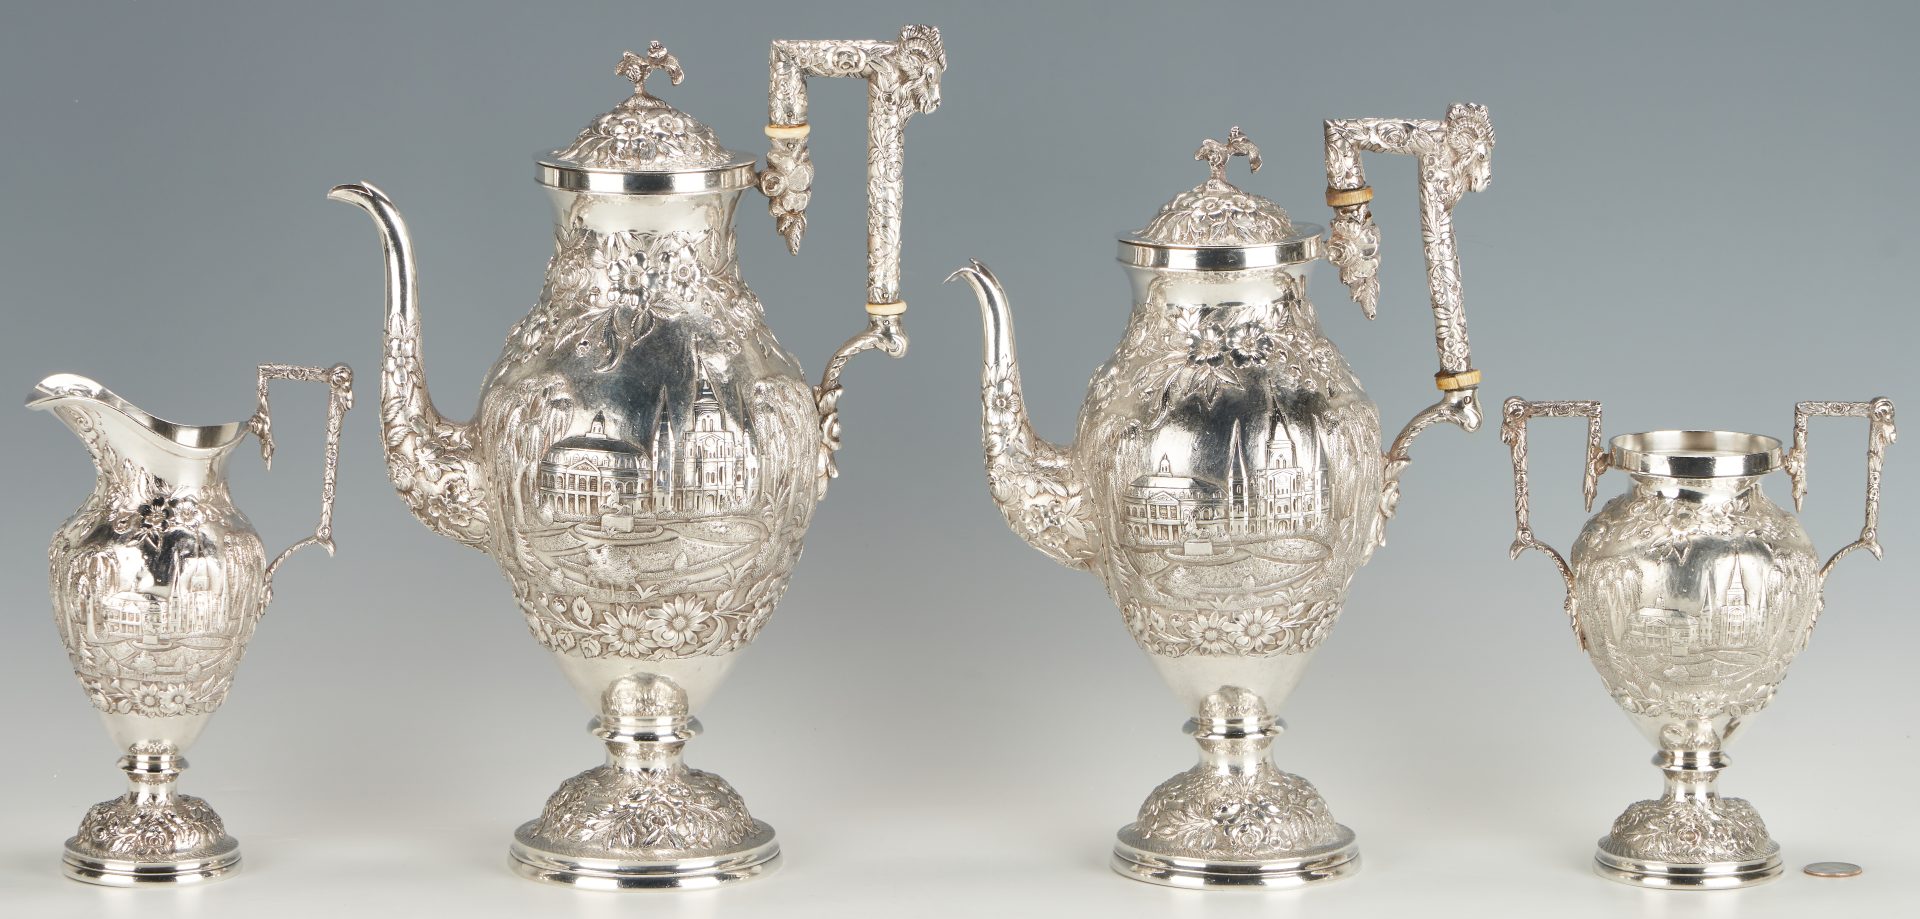 19th-century silver tea service decorated with New Orleans scenes, est. $8,000-$10,000